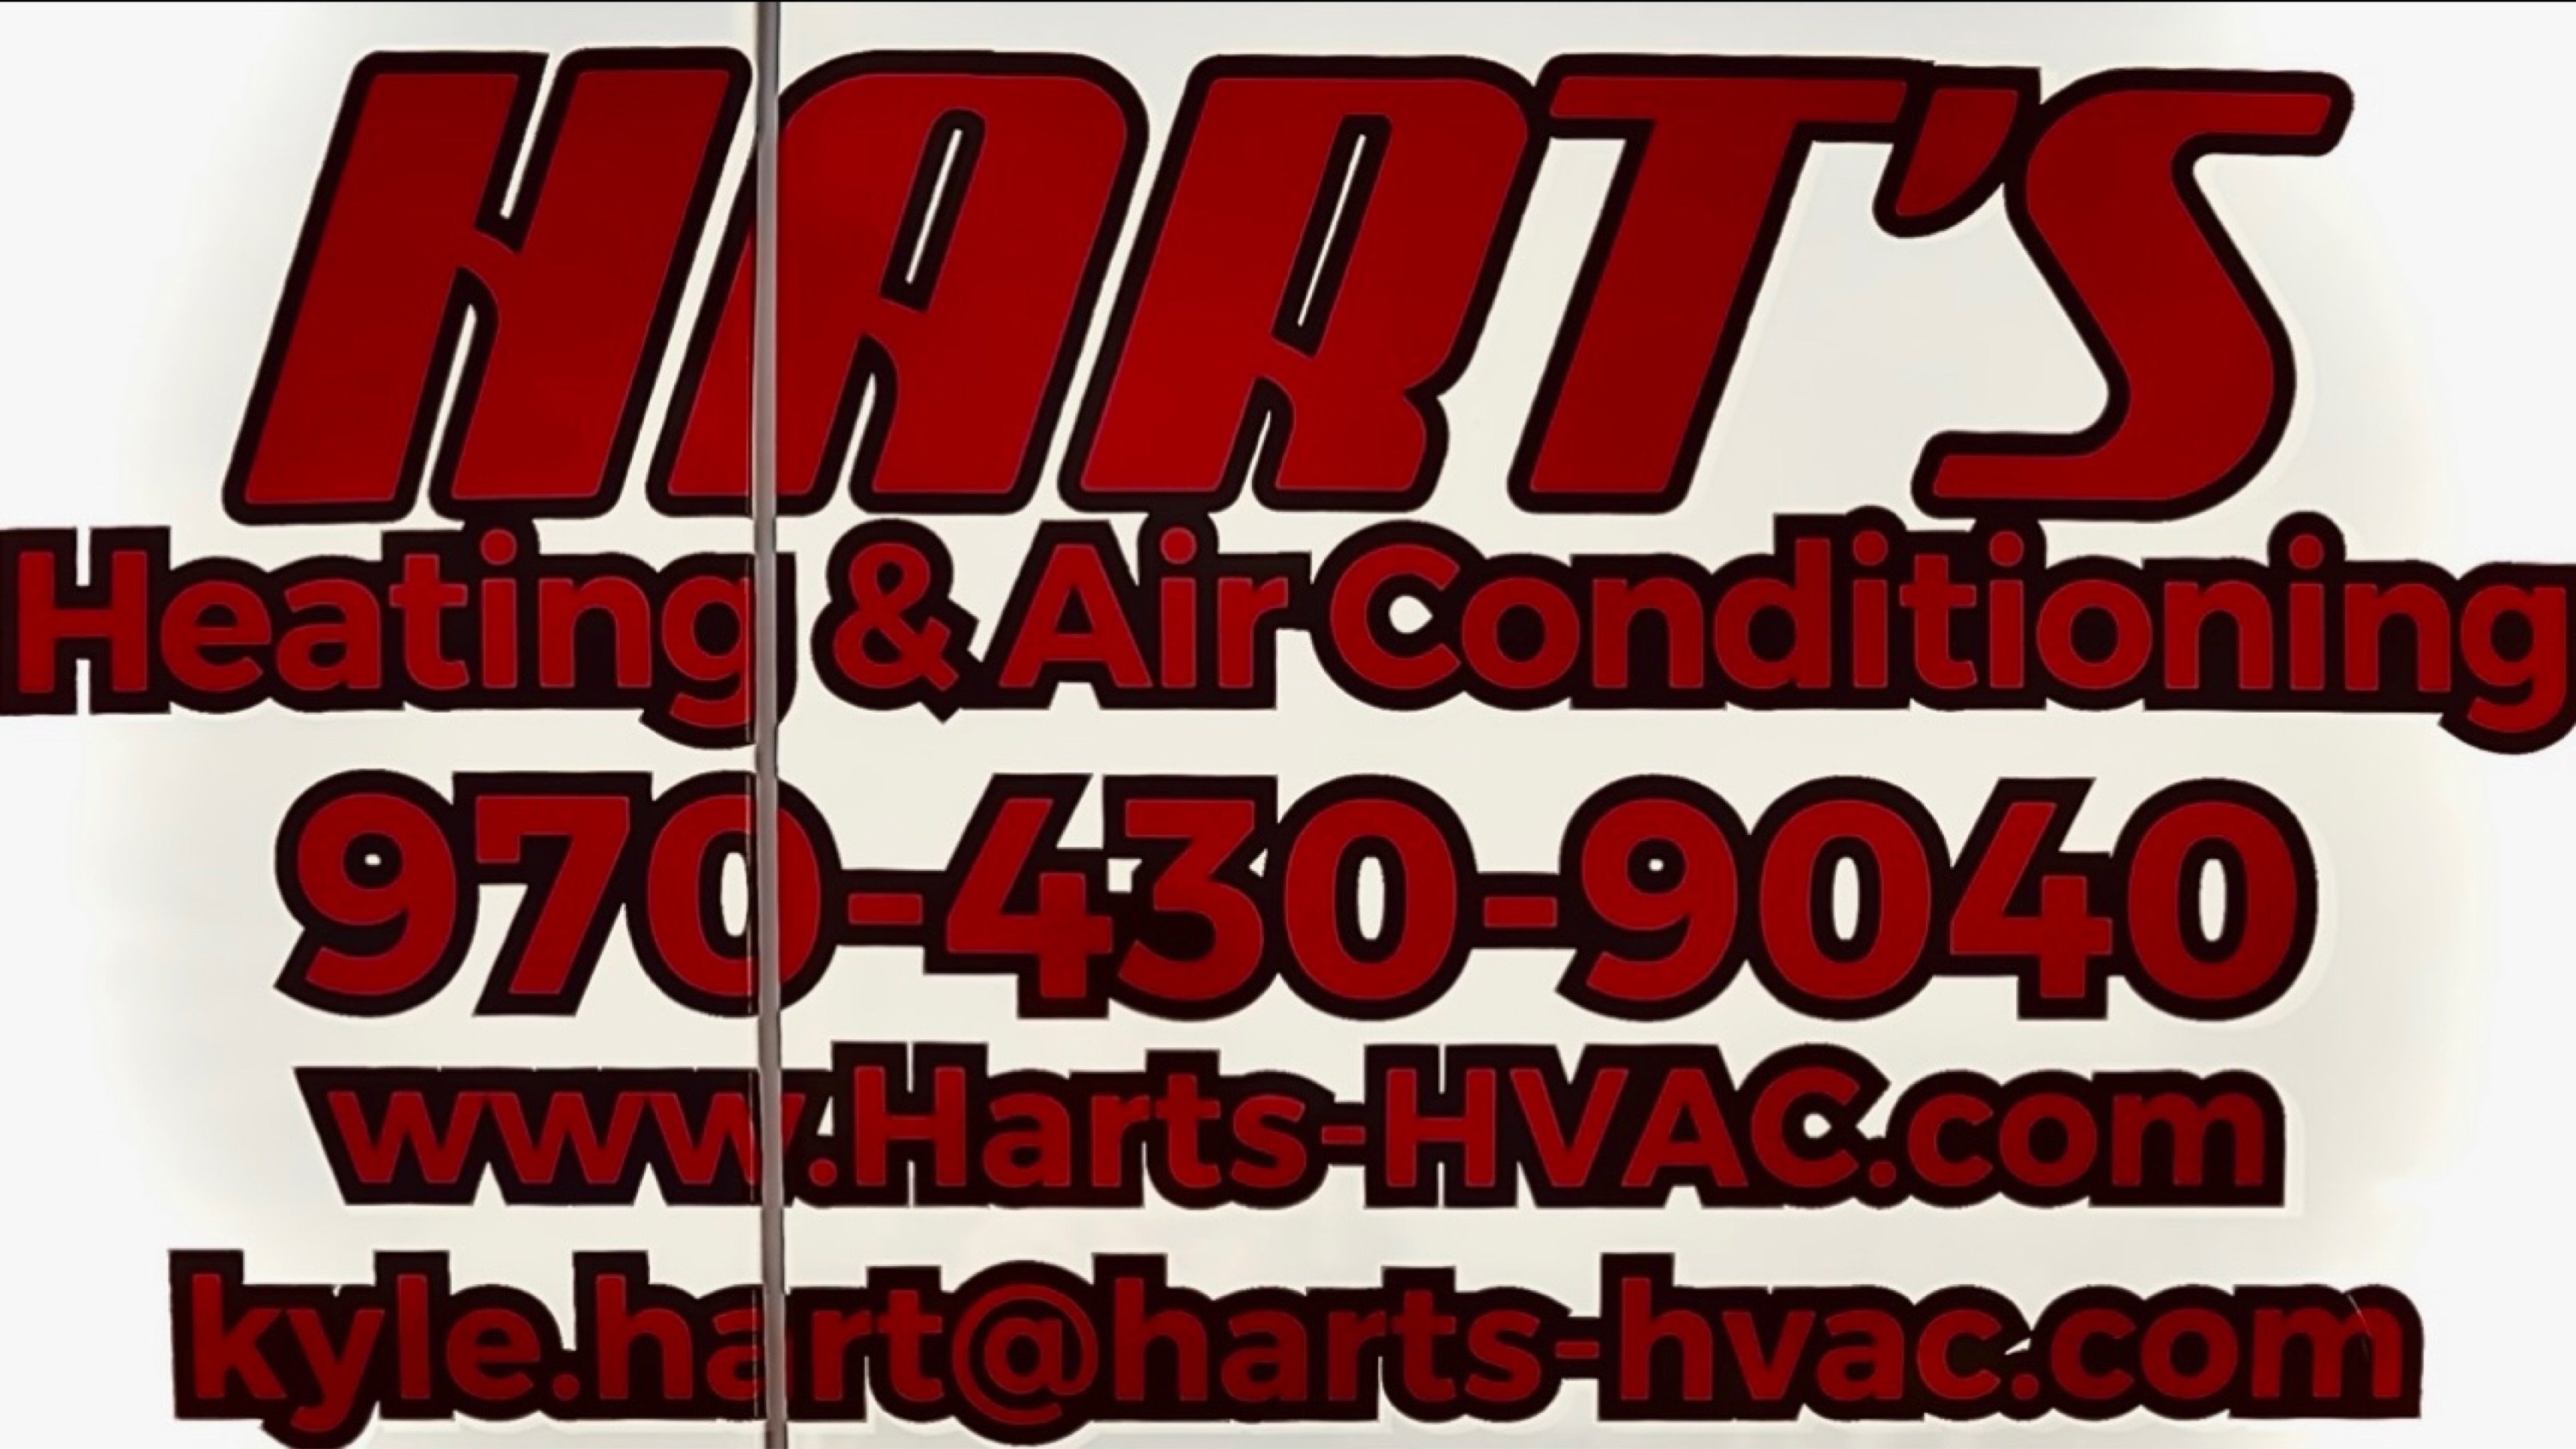 Hart's Heating & Air Conditioning Logo